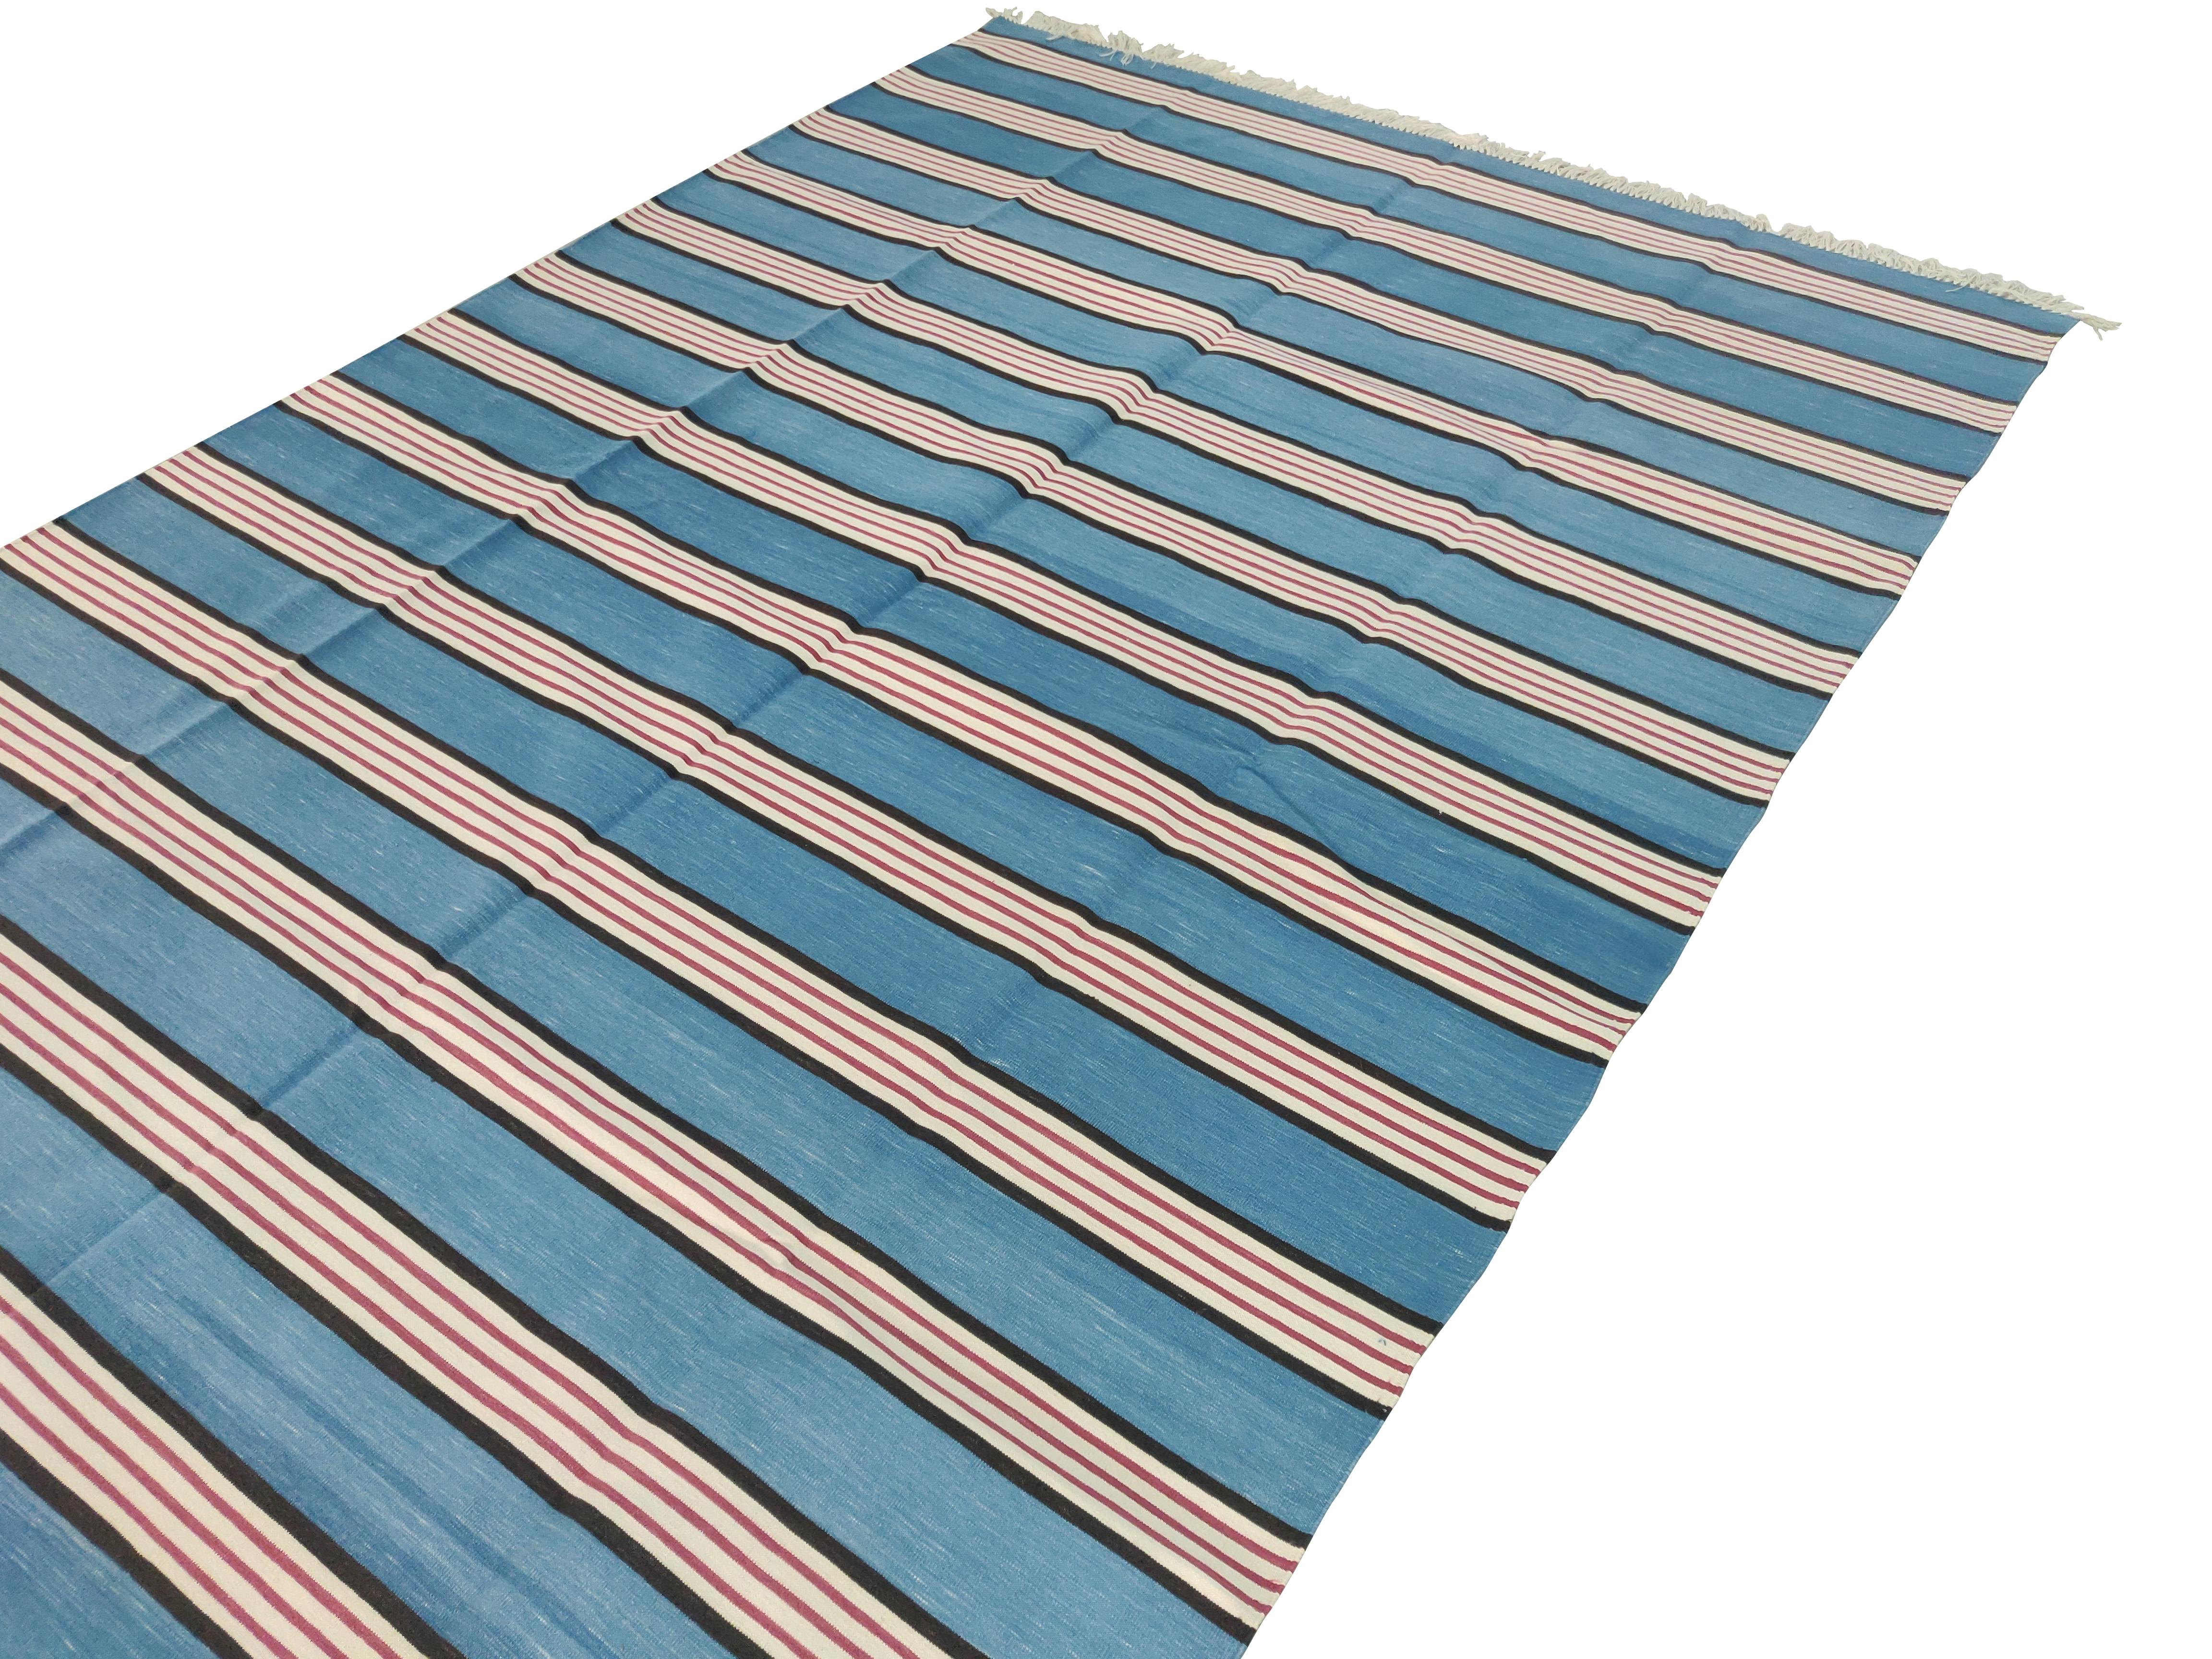 Hand-Woven Handmade Cotton Area Flat Weave Rug, 6x9 Blue And Pink Striped Indian Dhurrie For Sale